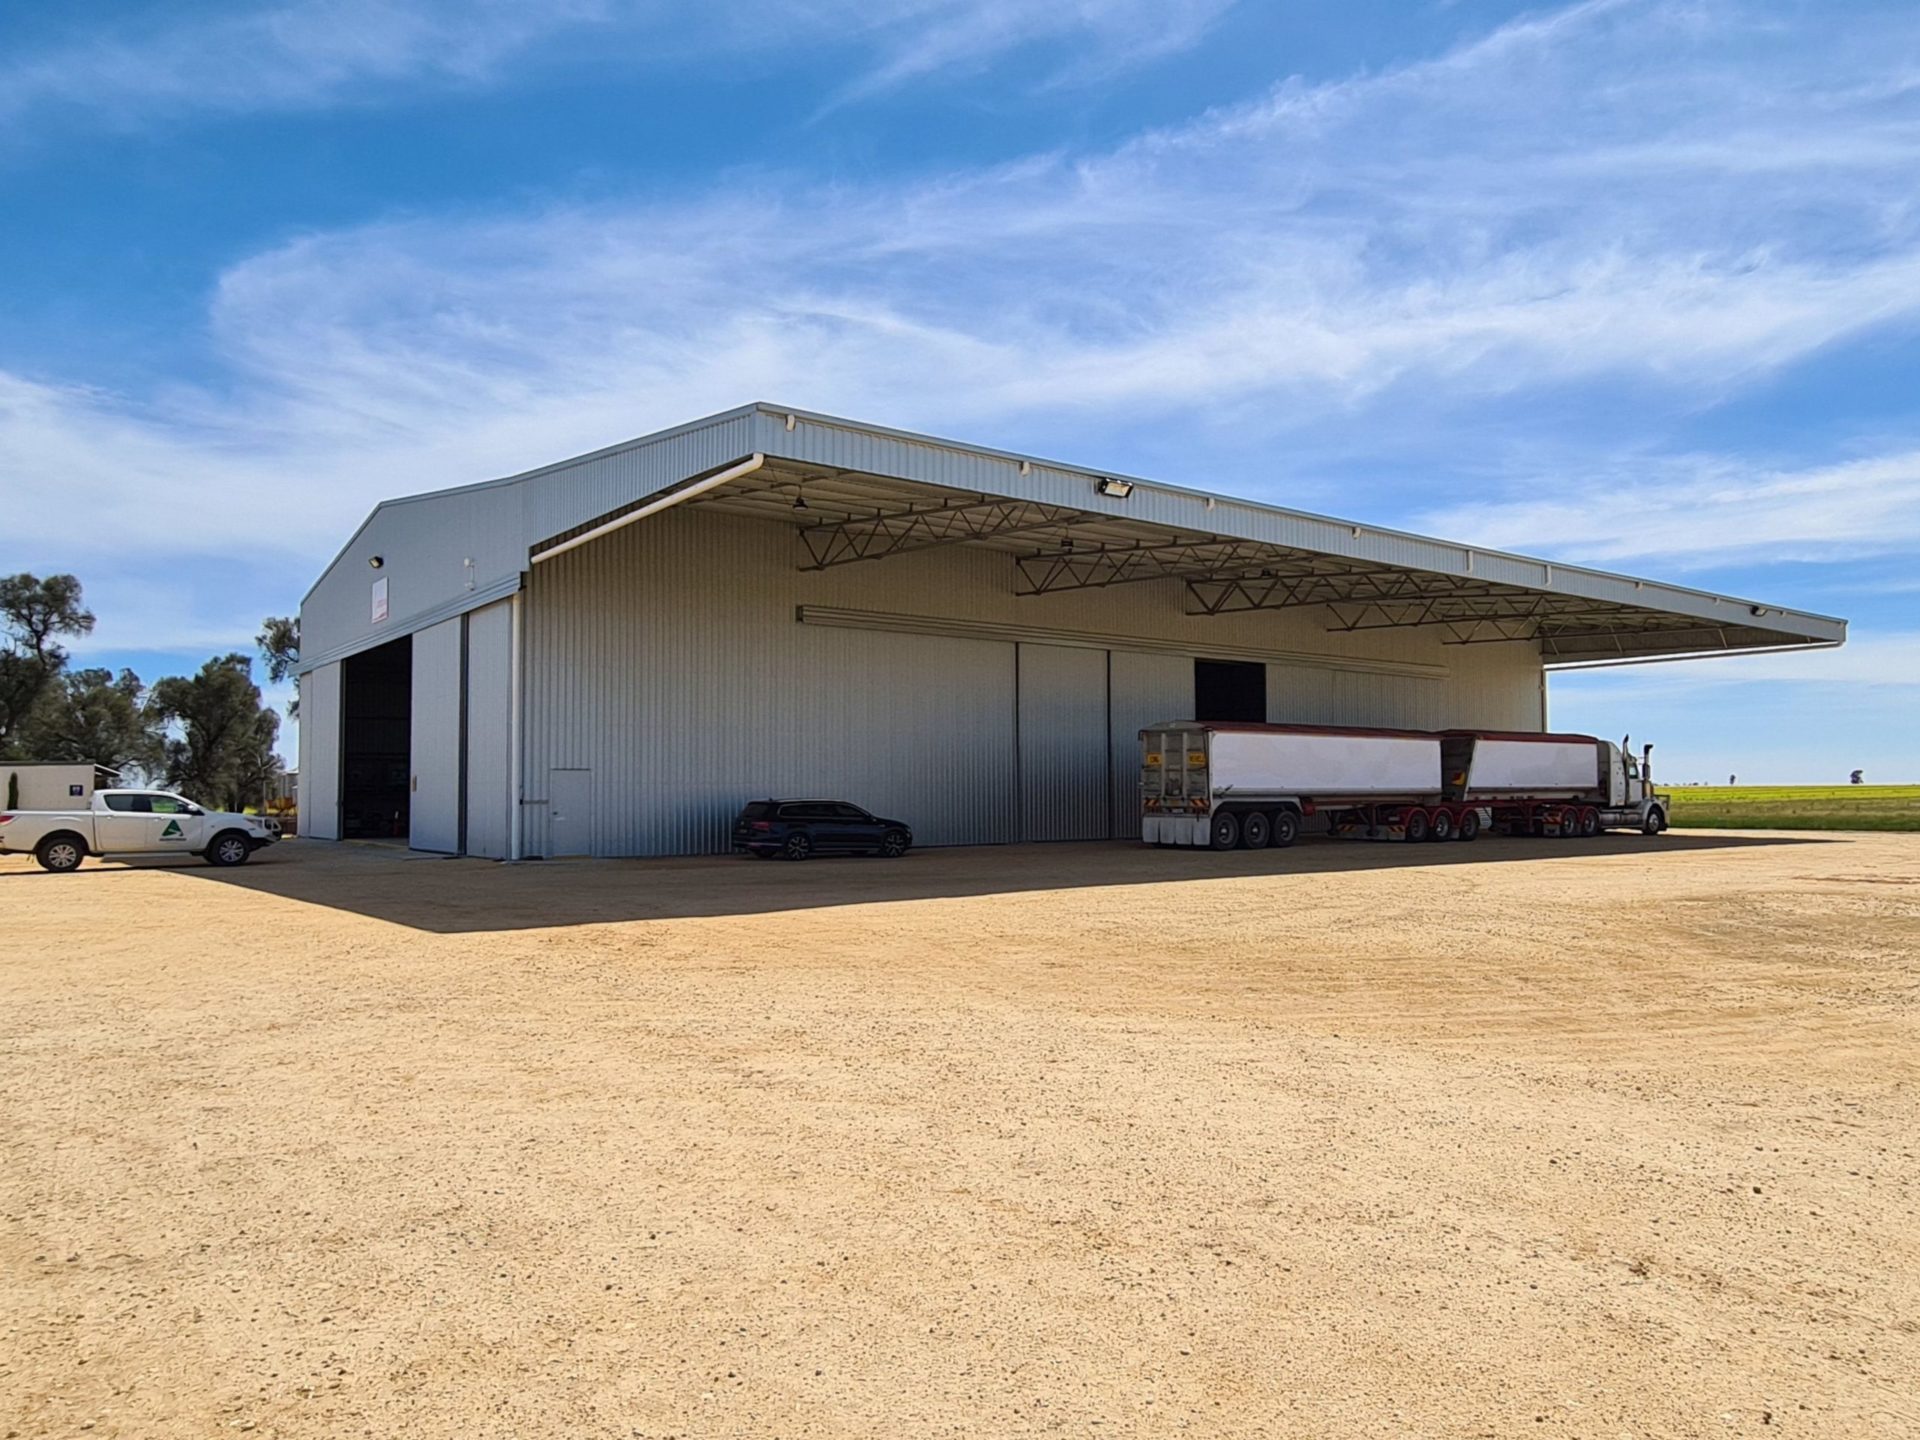 45m x 24m x 8.5m workshop shed with 12 metre canopy